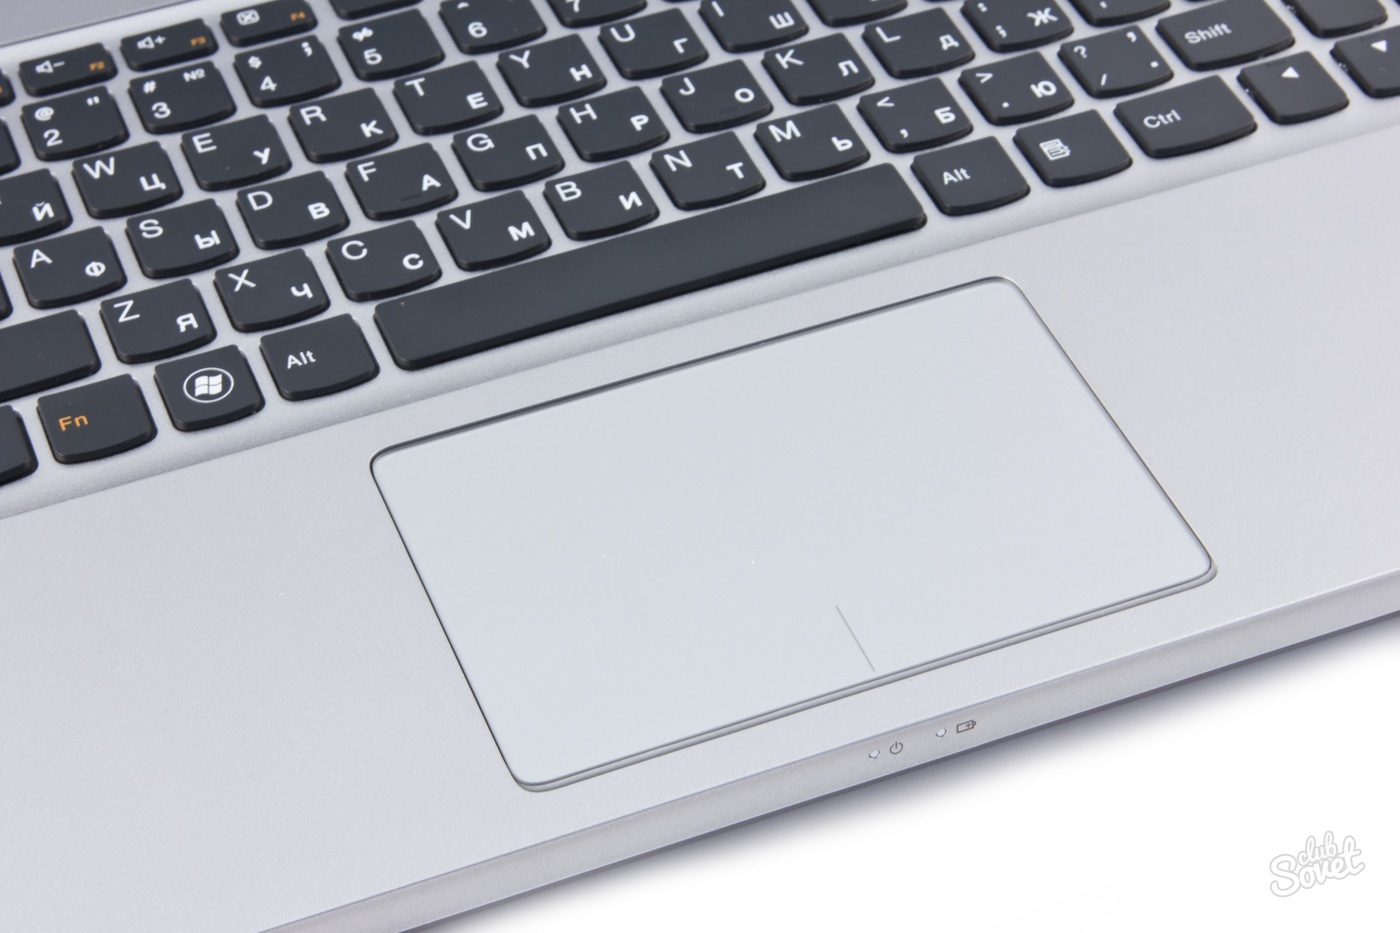 How to turn off the touchpad on the laptop